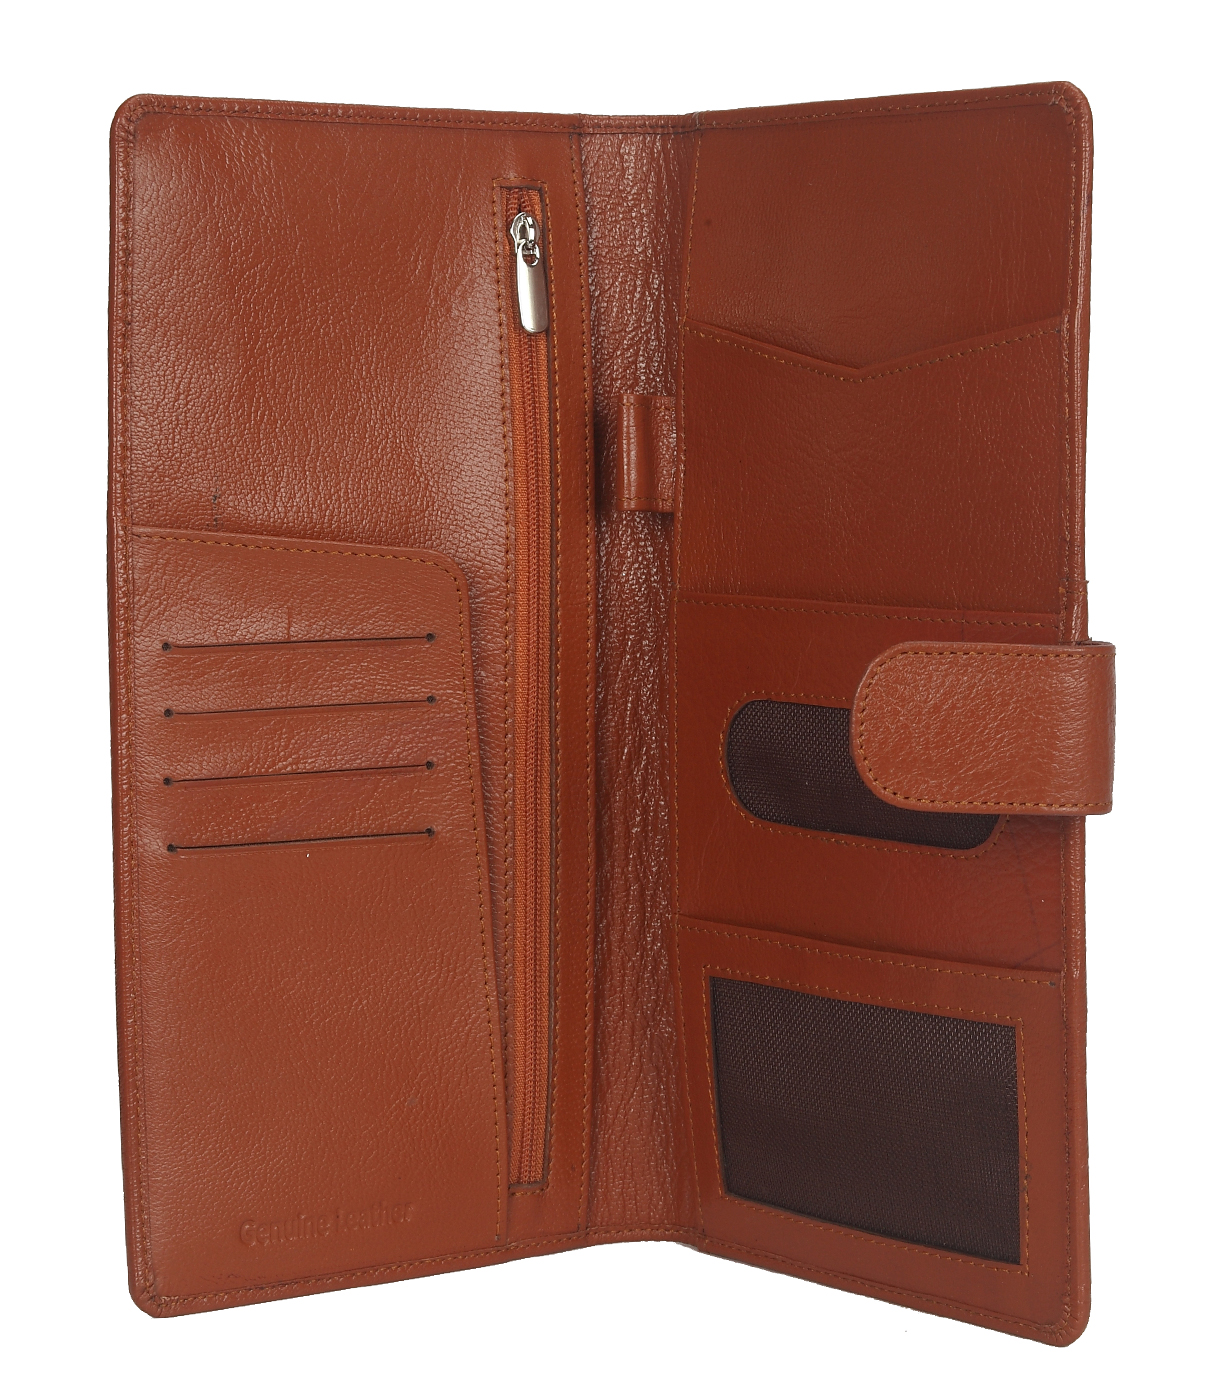 Wallet-Cynthia-Unisex wallet for travel documents in Genuine Leather - Tan